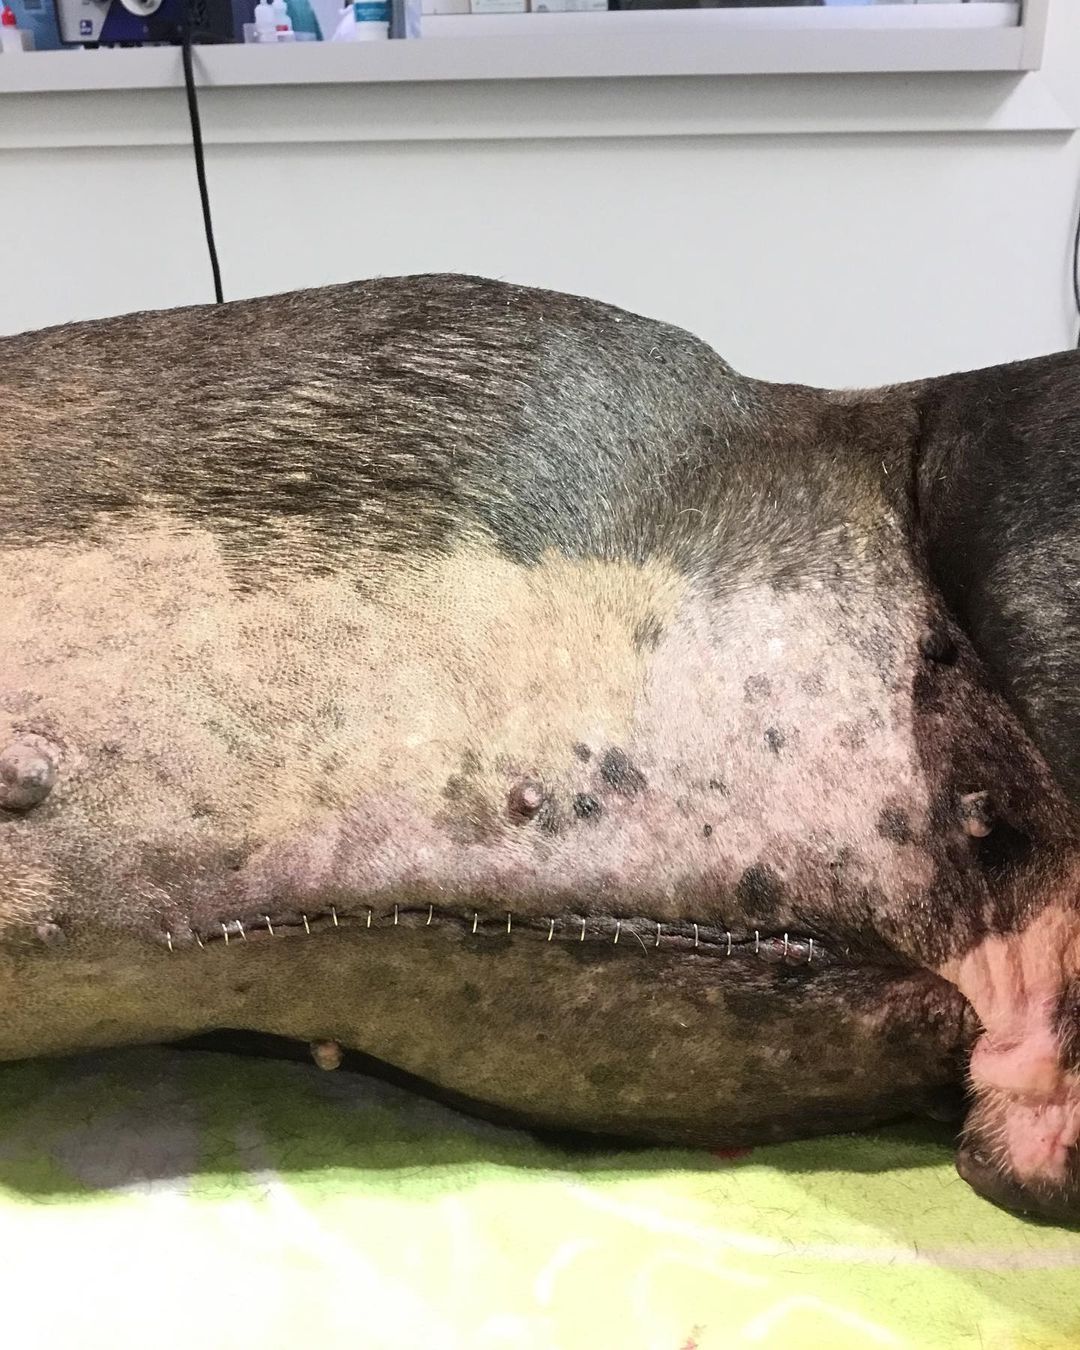 💔 Update on Buzz PART 2💔

BIG thanks to @blueclearsky2 @nickbrunson @paige_ah @paige_glumac and so many other amazing supporters for their generous donations. Lastly, huge thanks to our vet Dr. Huddleston and his staff at @westheimeranimal for always giving stellar care and service to our bullies for the past 8 years! This clinic will always do anything to save an animal. ❤️

Unfortunately, we still have a balance in our account which includes his cremation and urn. Thank you in advance for your help. No amount is too small. 
You may donate to our PayPal: 
info@ bravebullyrescue.org or you may donate directly to our vet clinic. Just say you will like to make a donation for BUZZ with Brave Bully Rescue:
Westheimer Animal Clinic Bellaire 
(713) 622-1270

Here is a quote we have always believed in since we started BBR 3/2014. This is why we do rescue.

💕